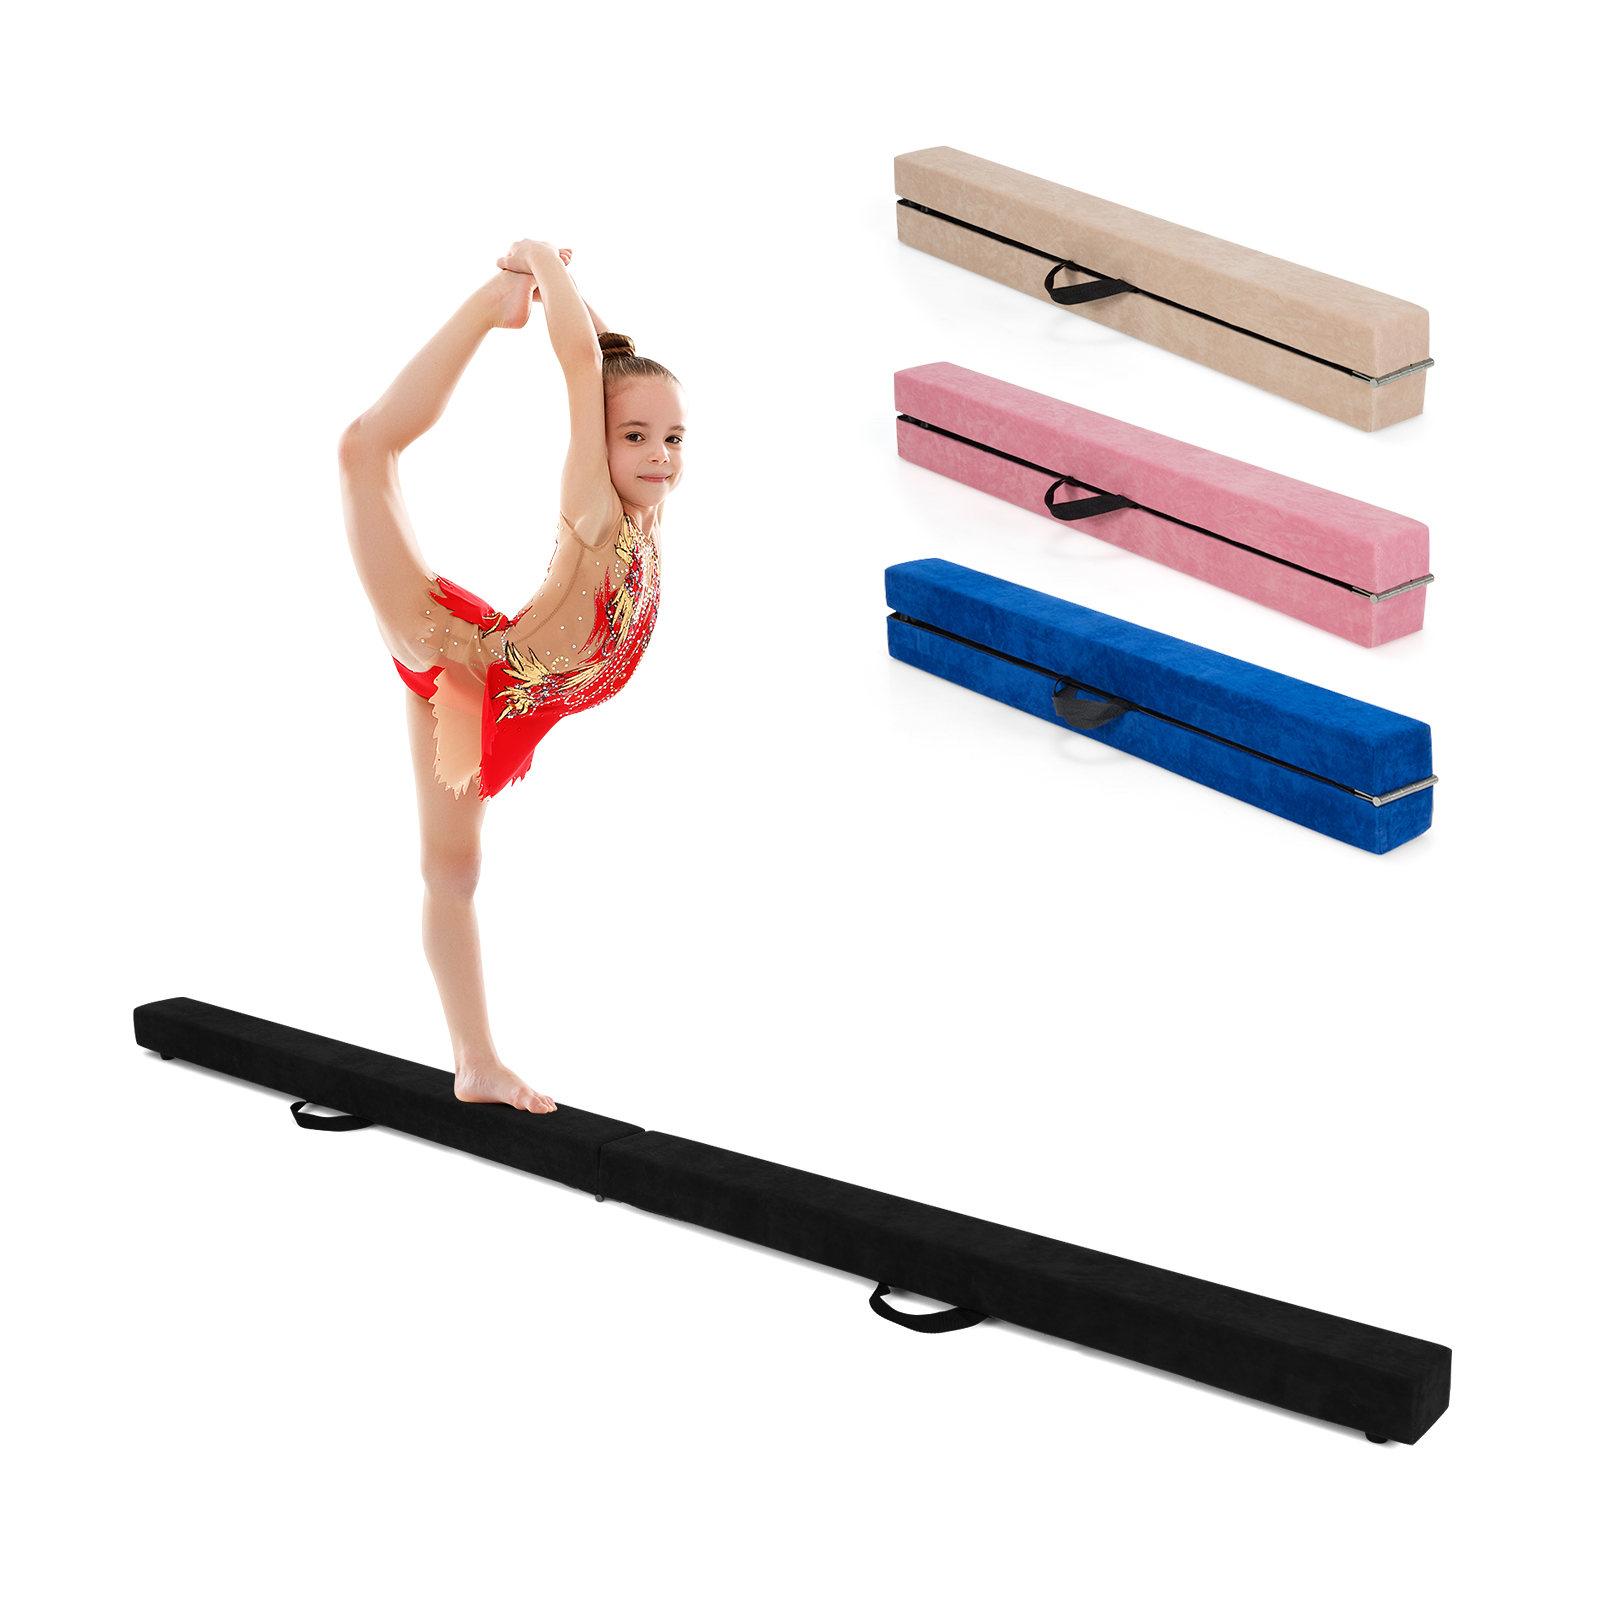 Portable Folding Gymnastic Beam with Carrying Handles-Black